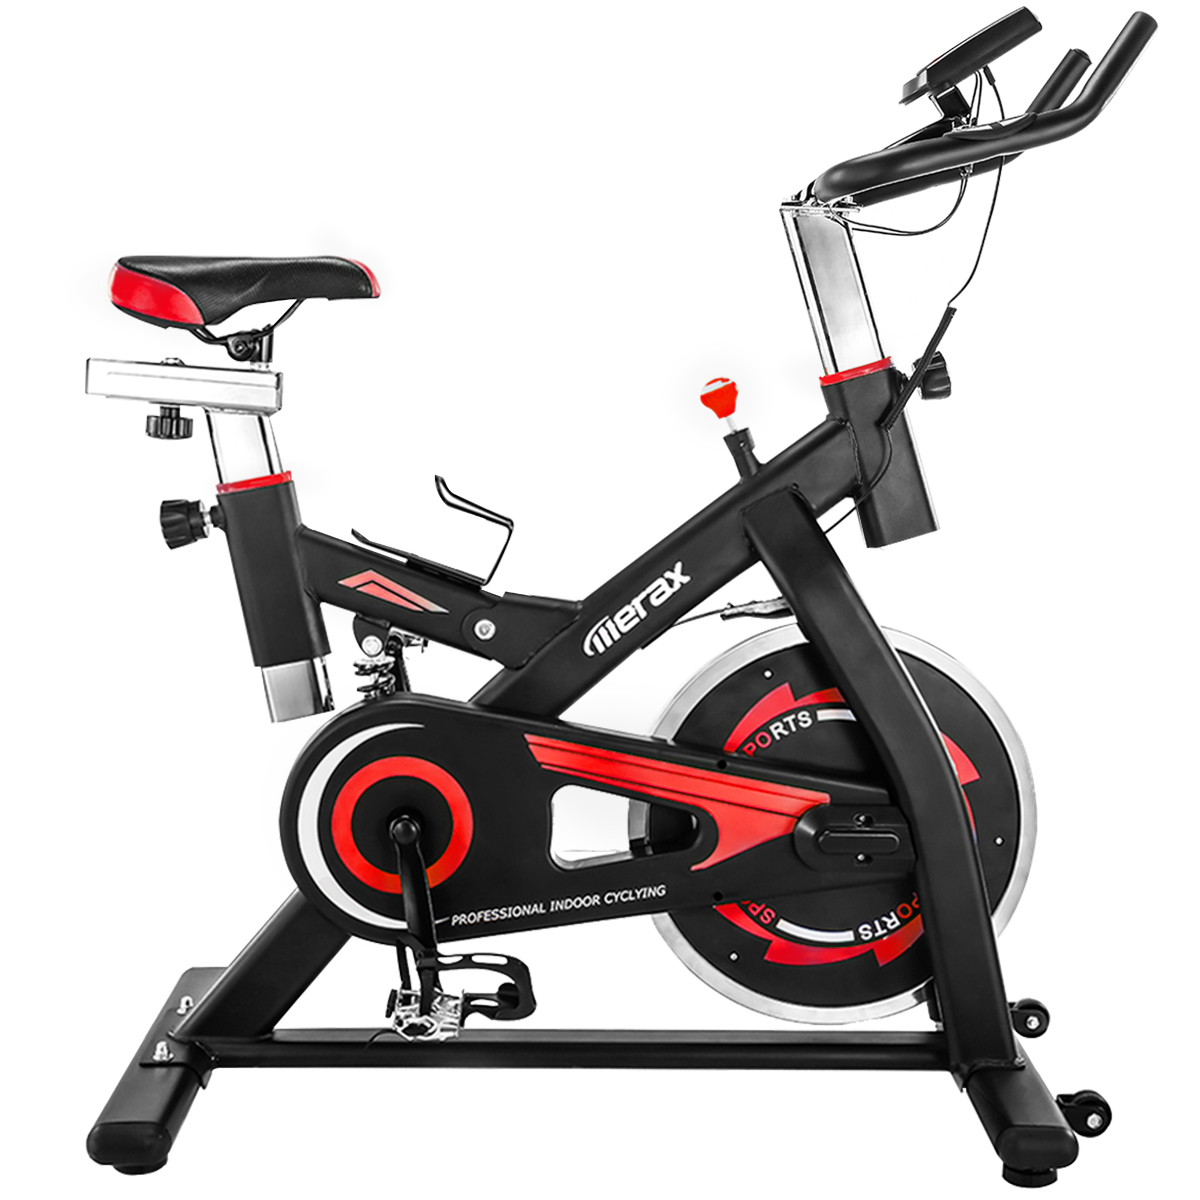 

[US DIRECT] Merax S501 Indoor Cycling Bike Belt Drive Exercise Bike with 28 lbs Flywheel Exercise Tools Led Player